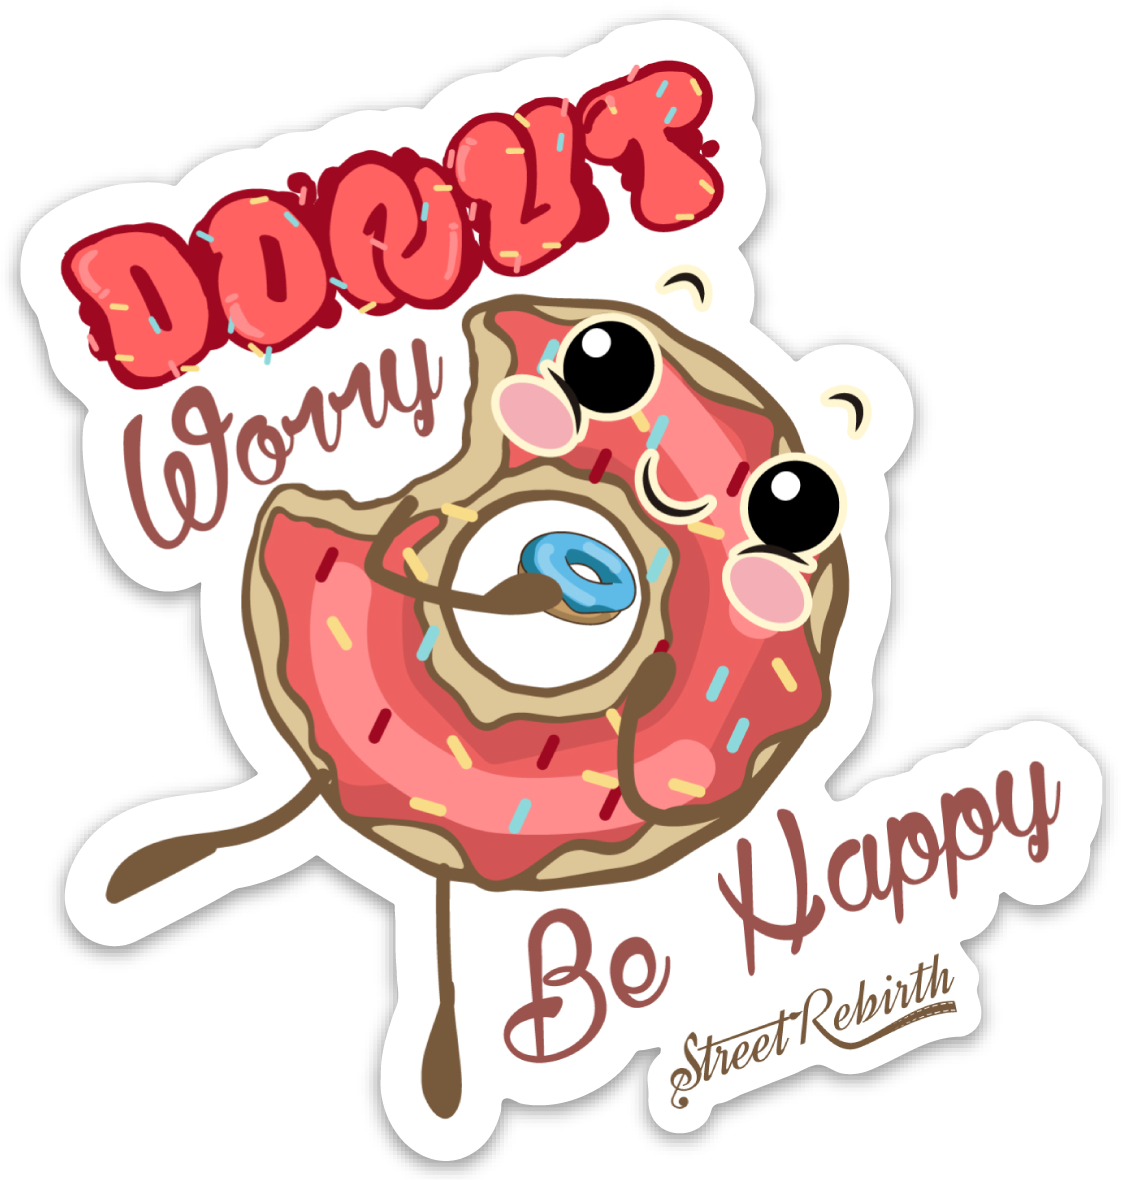 Donut Worry Be Happy  PUN STICKER – ONE 4 INCH WATER PROOF VINYL STICKER – FOR HYDRO FLASK, SKATEBOARD, LAPTOP, PLANNER, CAR, COLLECTING, GIFTING